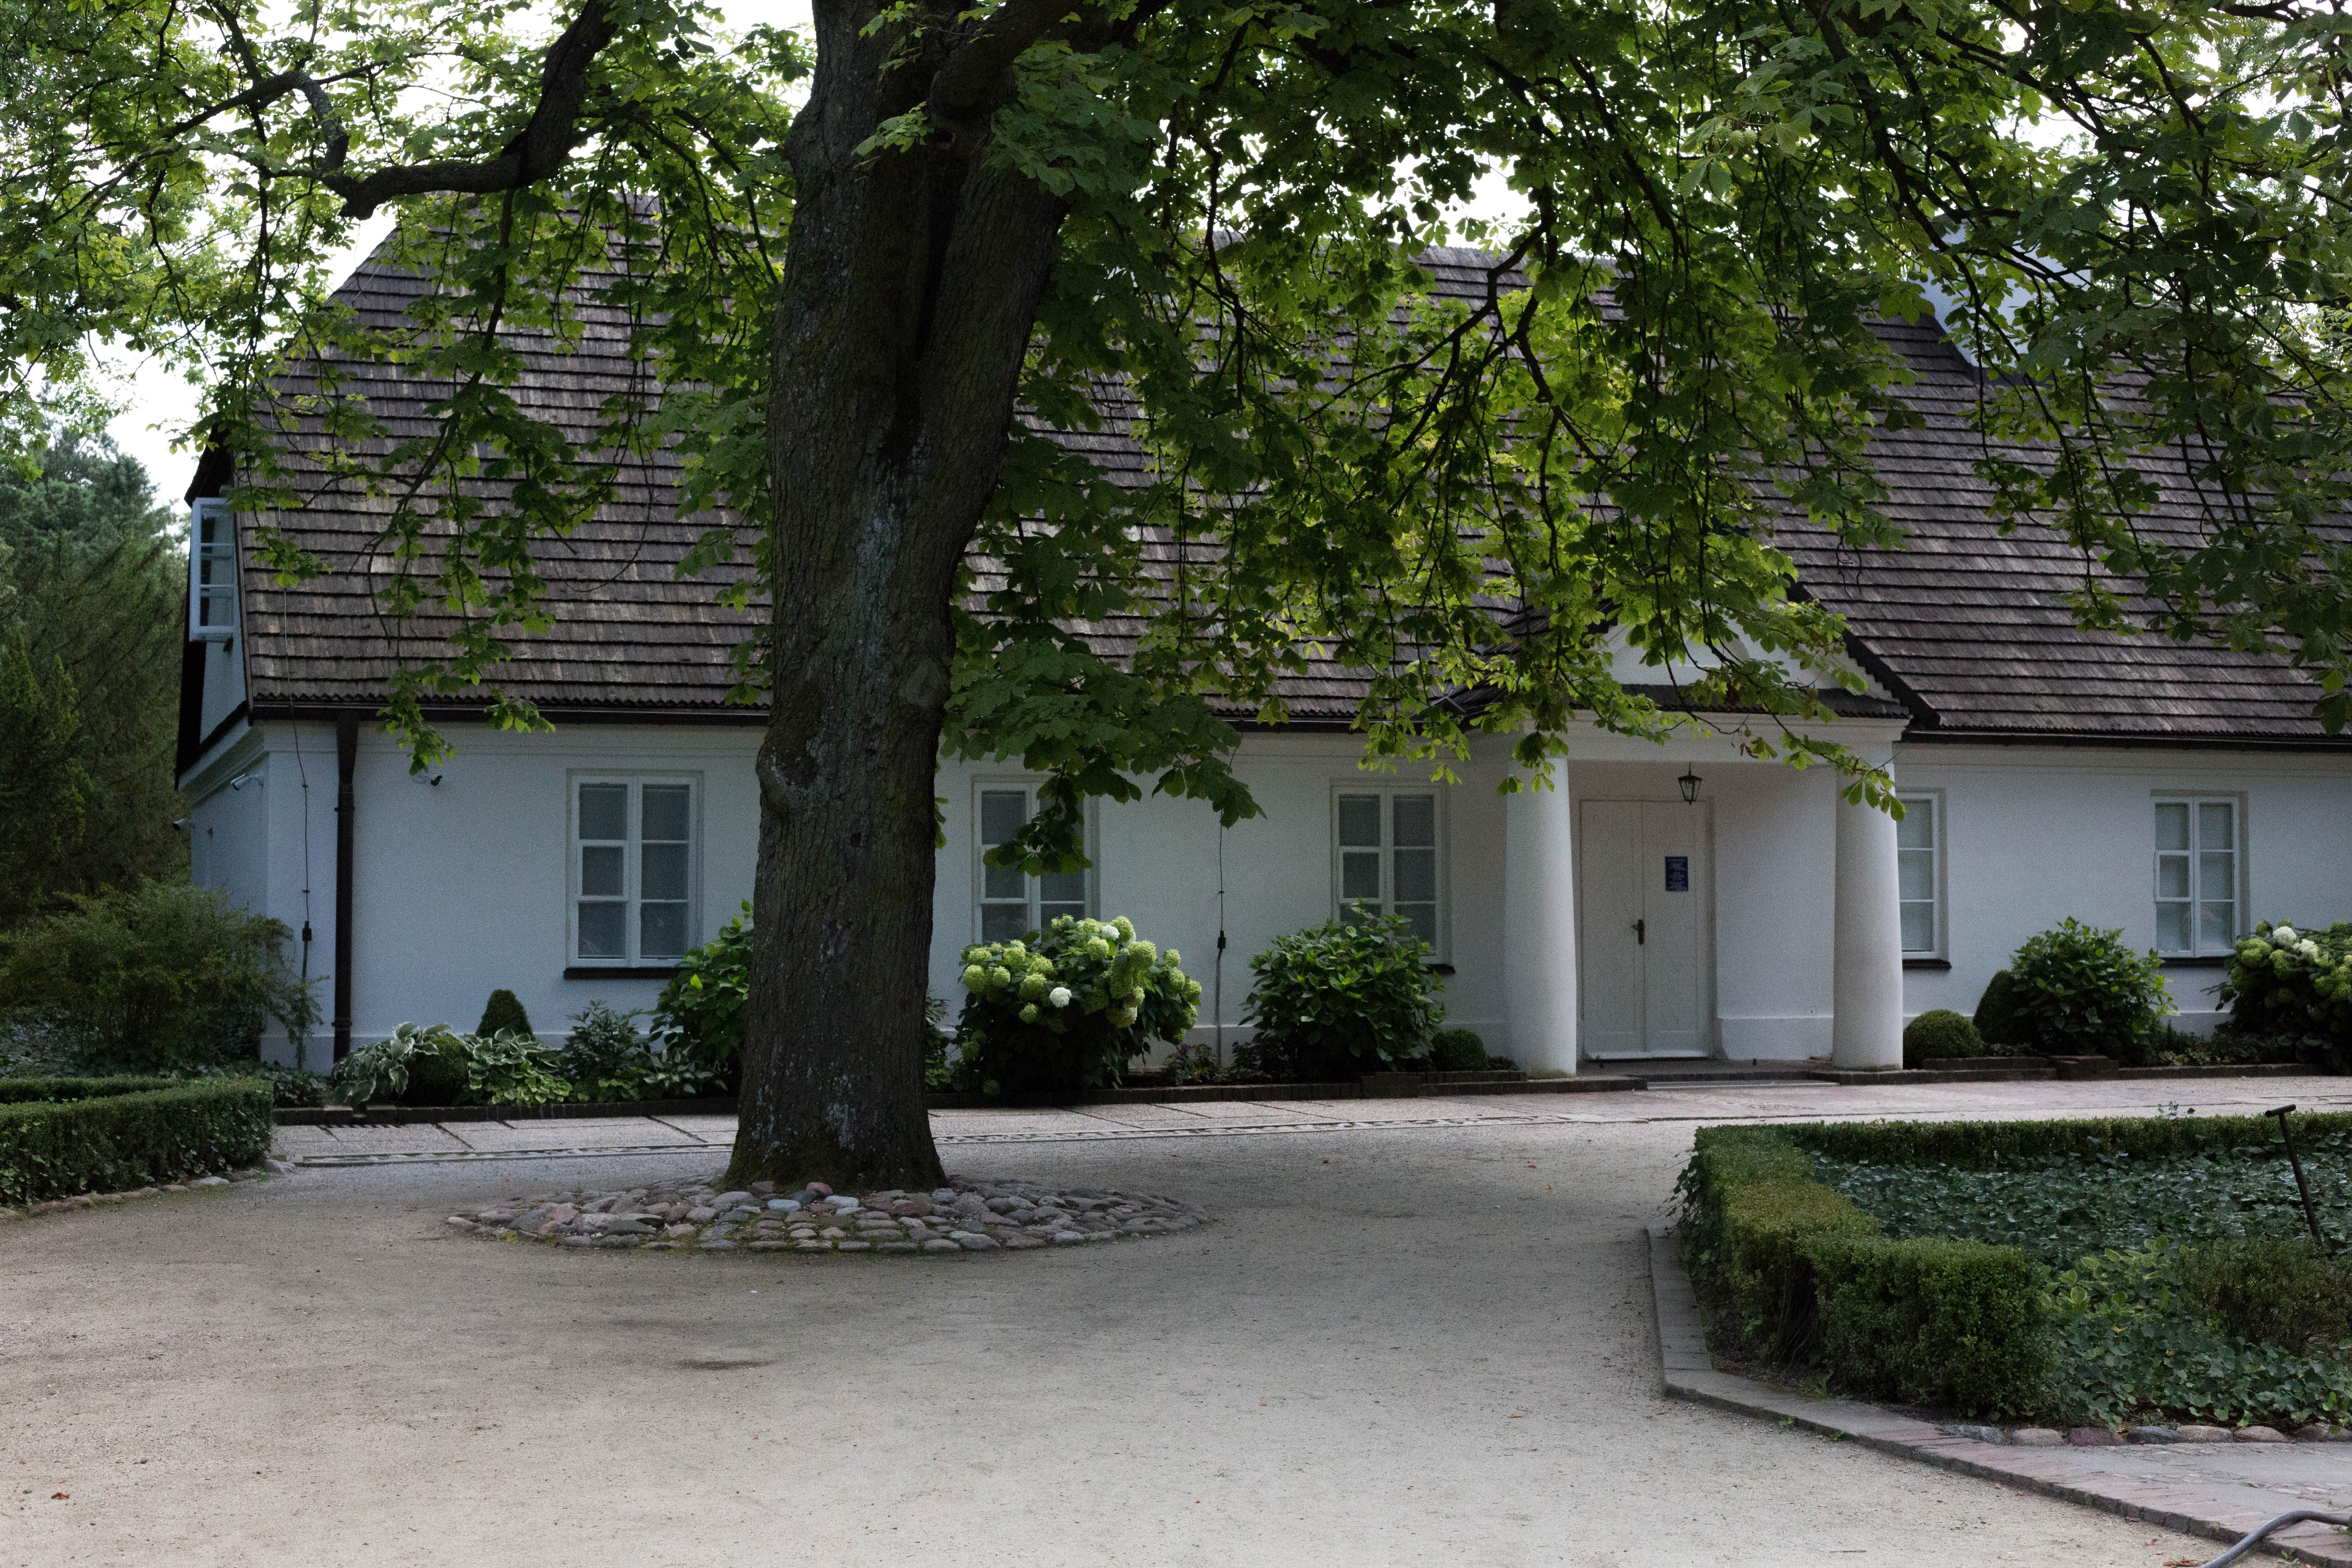 The annex of the chopin estate